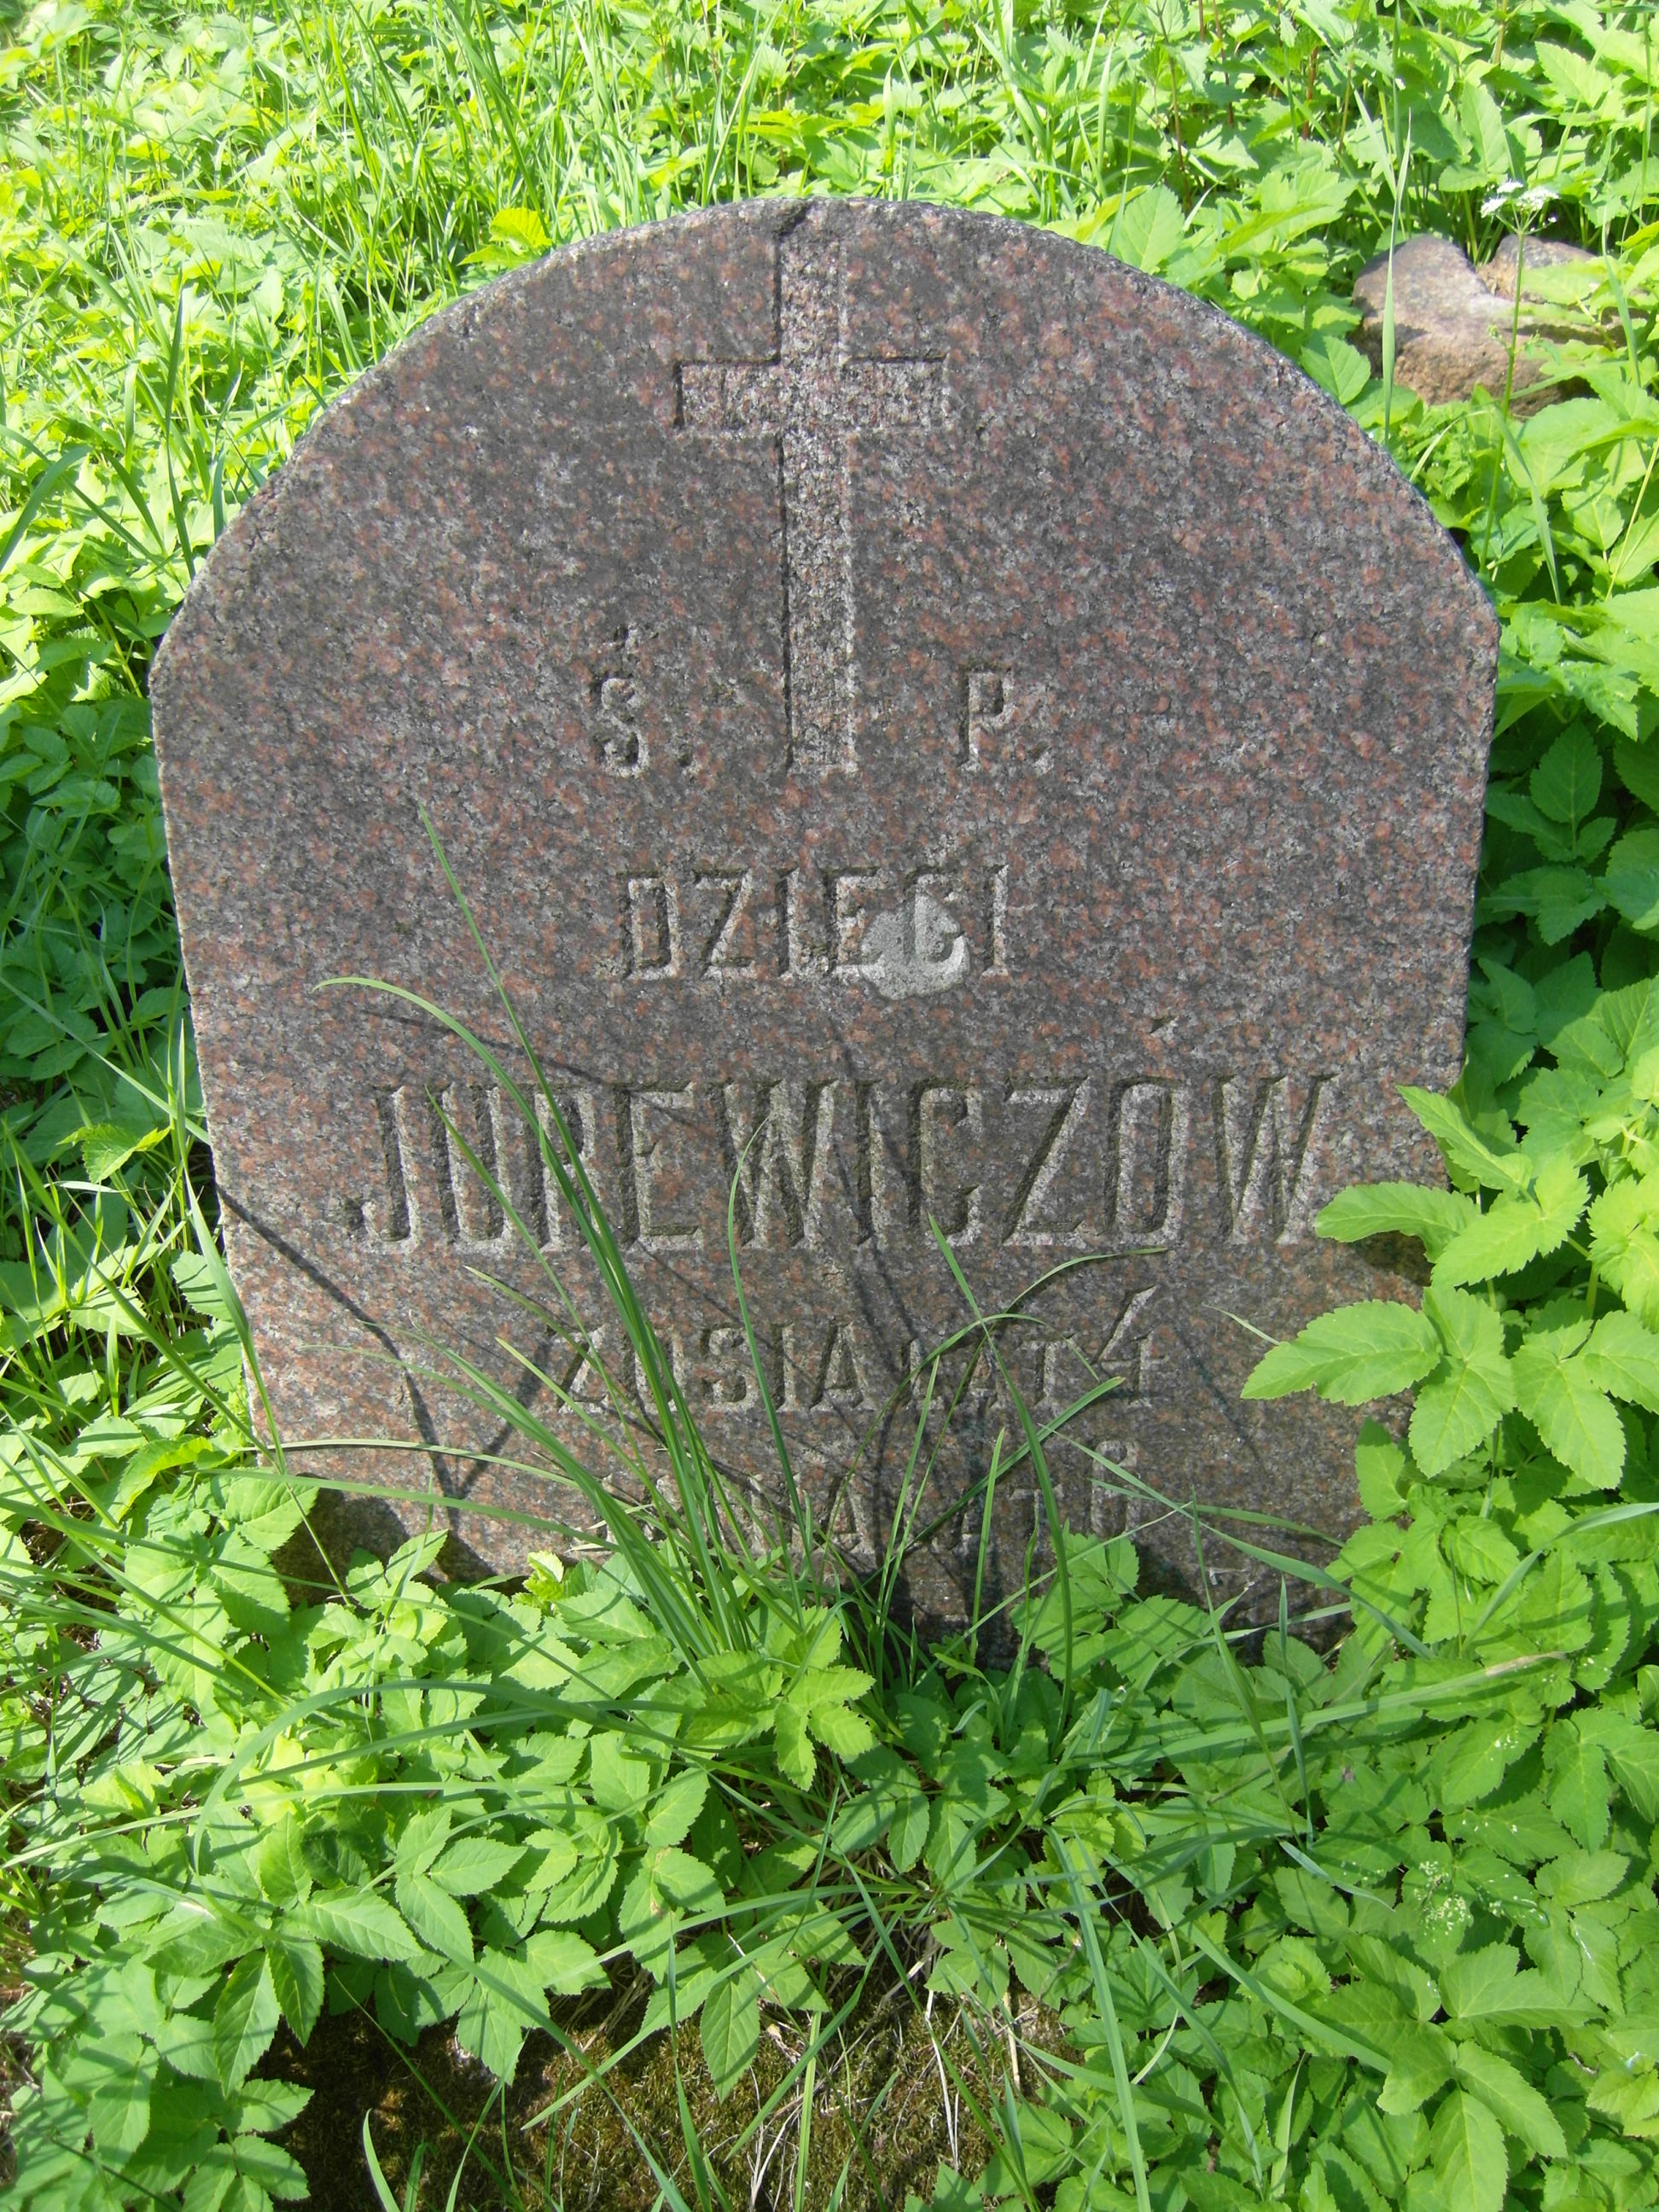 Fragment of the tomb of the Jurewicz family, Na Rossa cemetery in Vilnius, as of 2013.